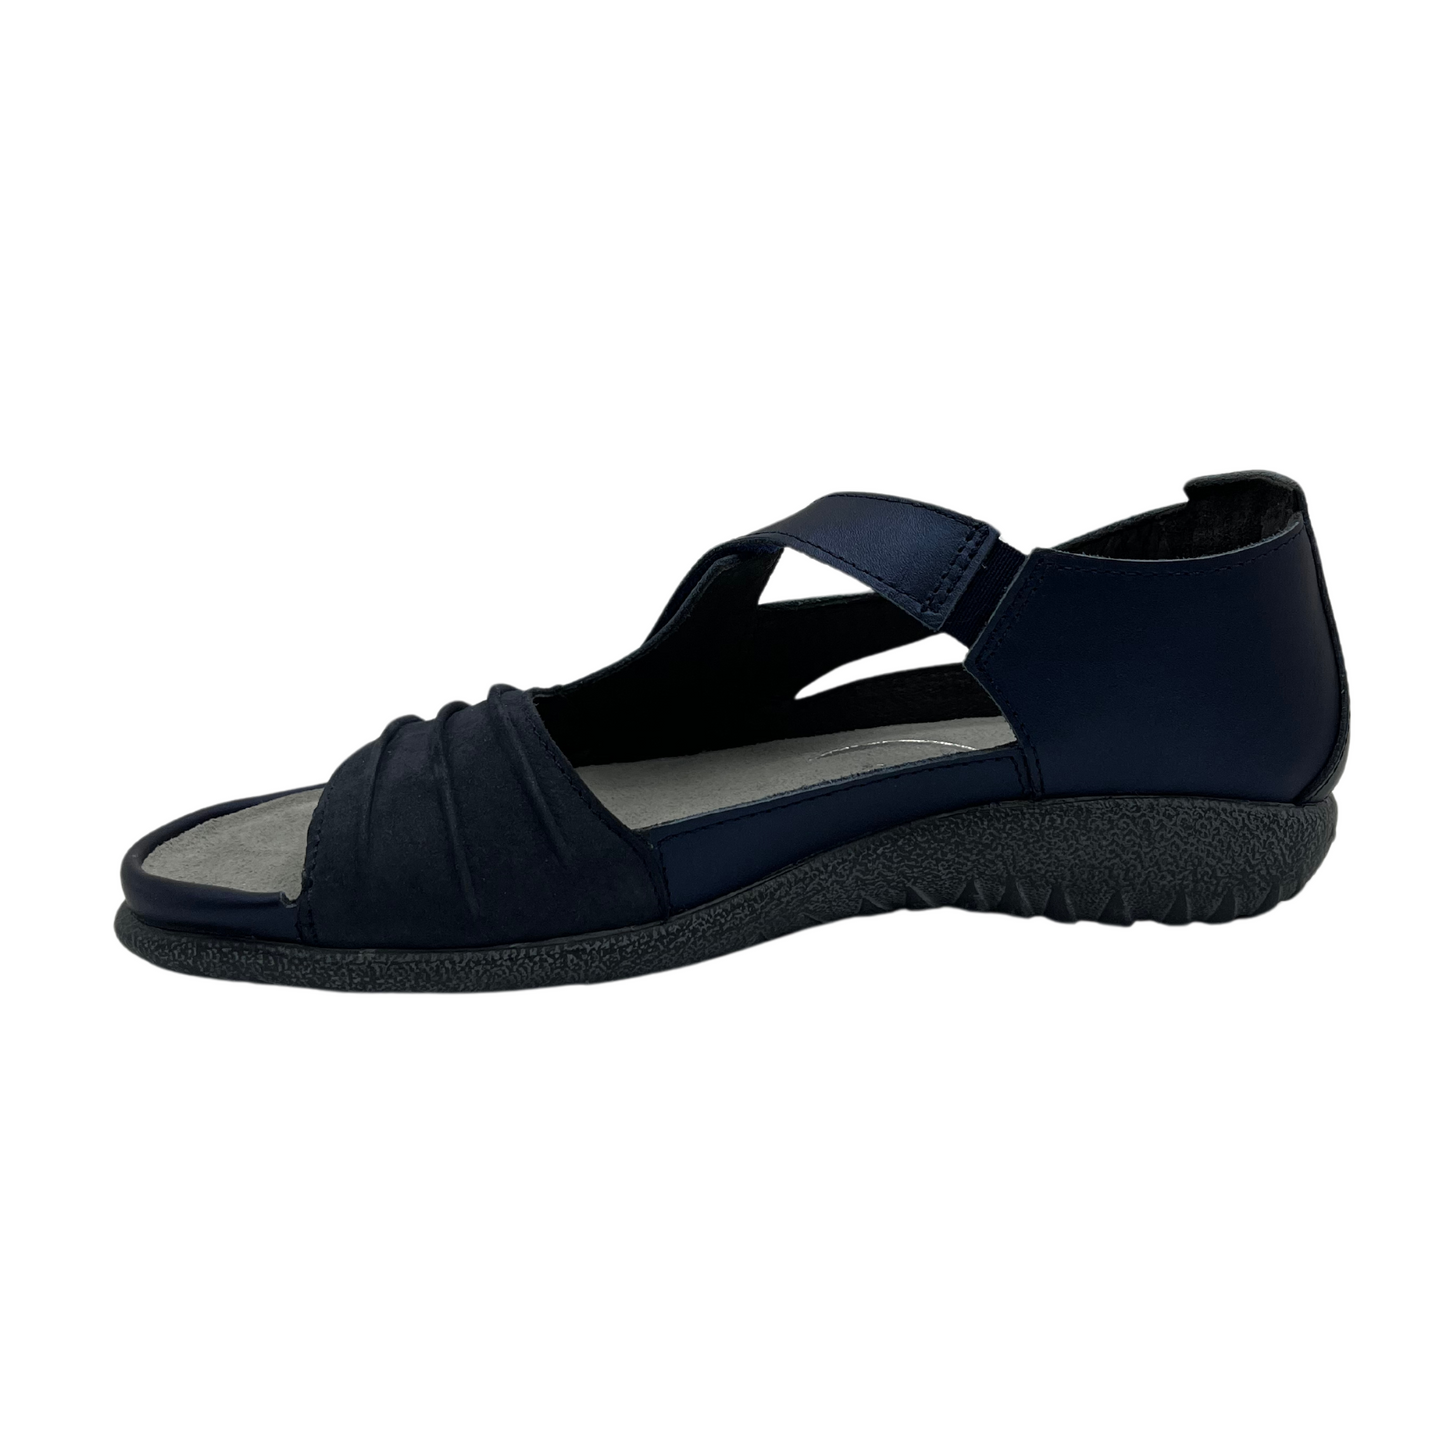 Left view of navy leather sandal with cross over velcro strap and open toe